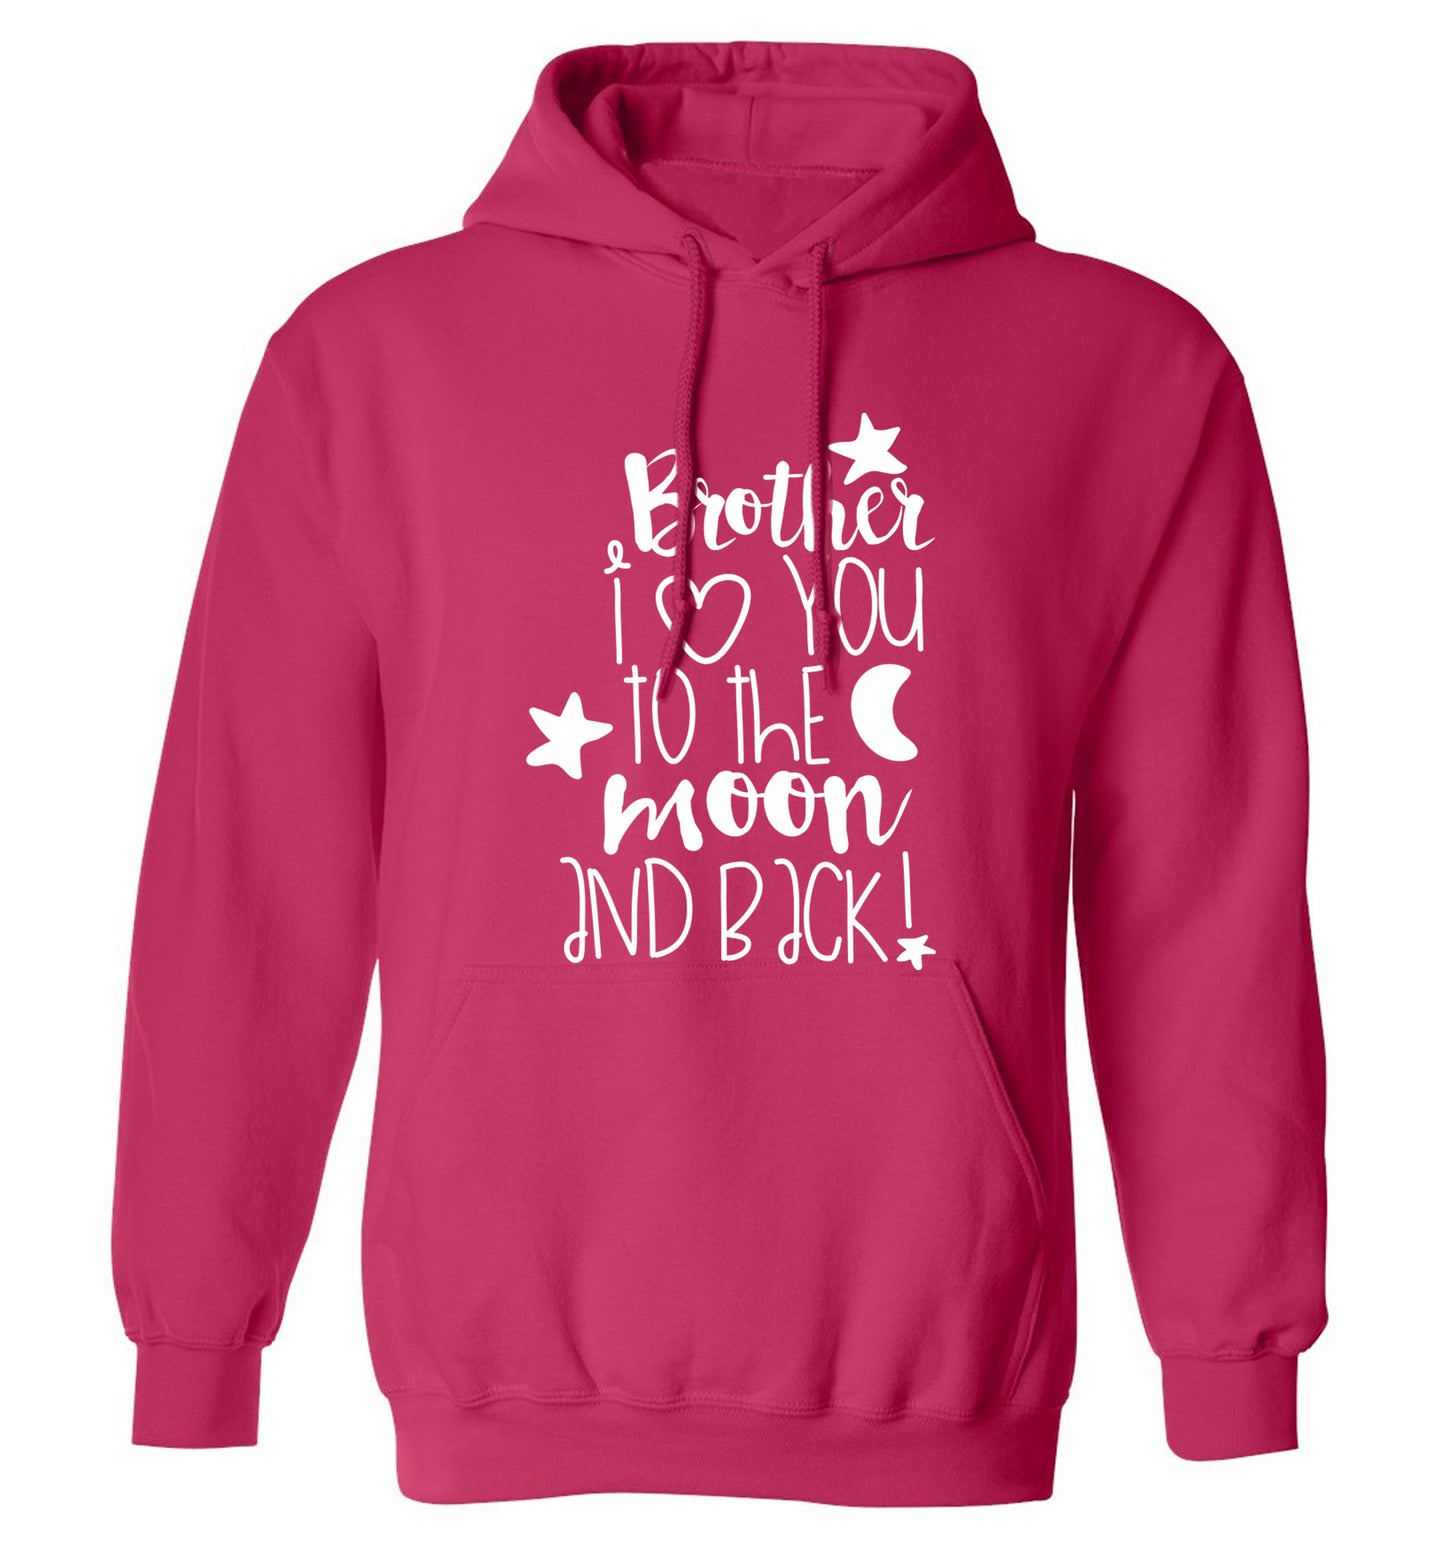 Brother I love you to the moon and back adults unisex pink hoodie 2XL